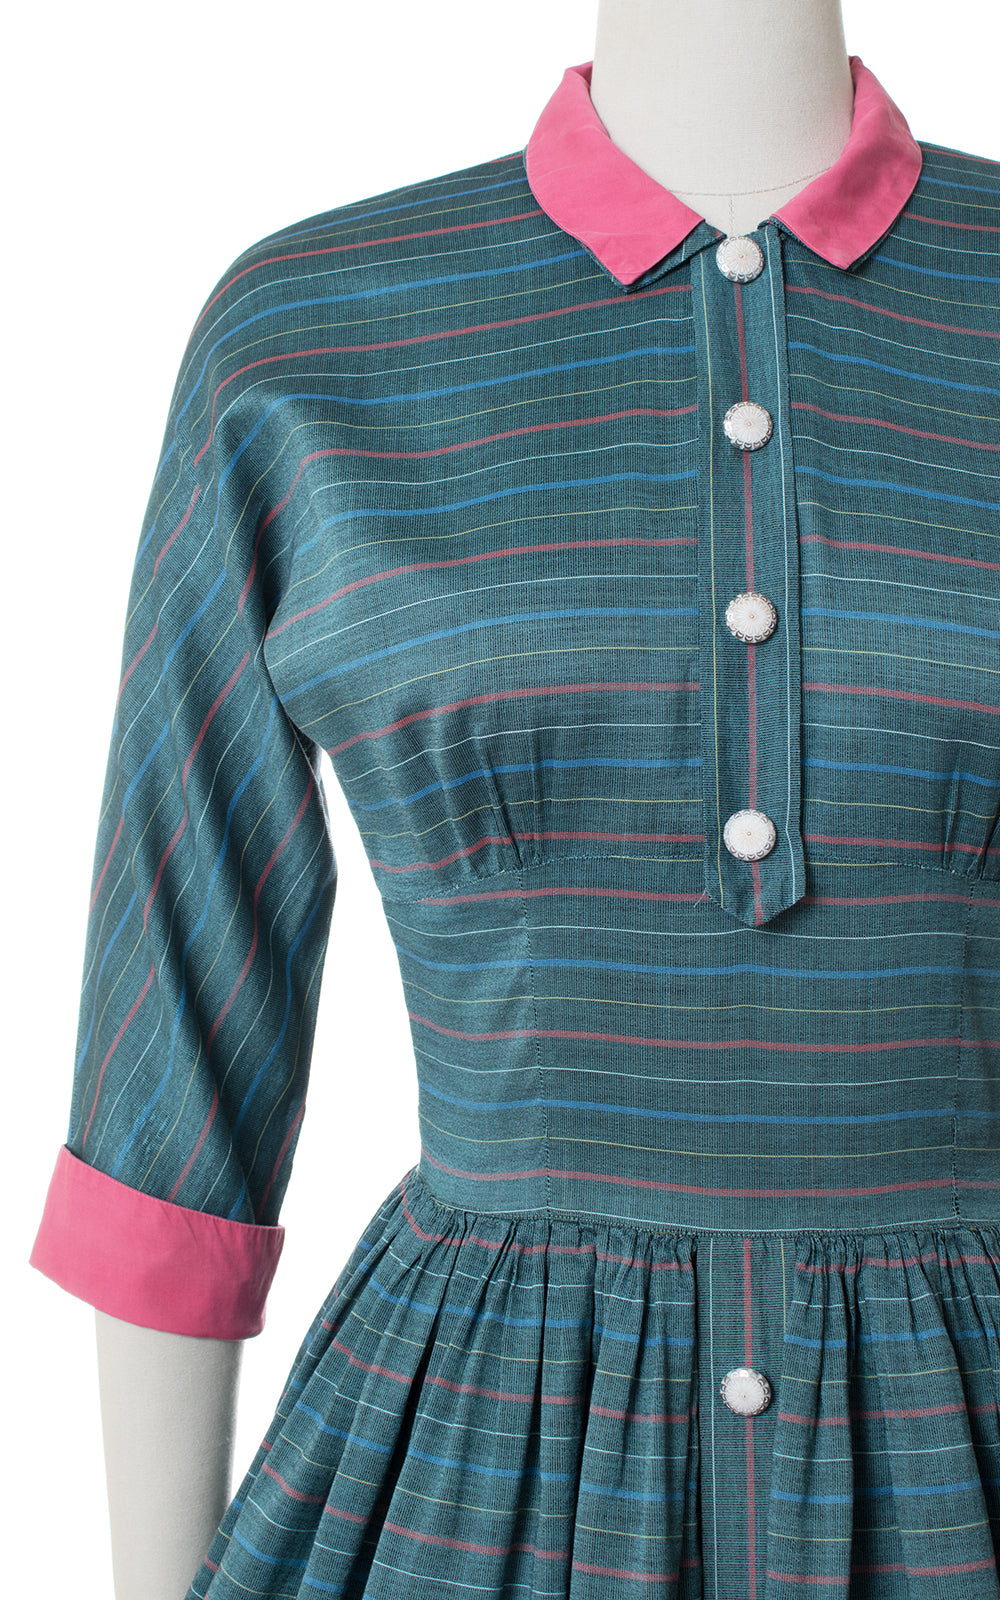 1950s Striped Teal & Pink Day Dress